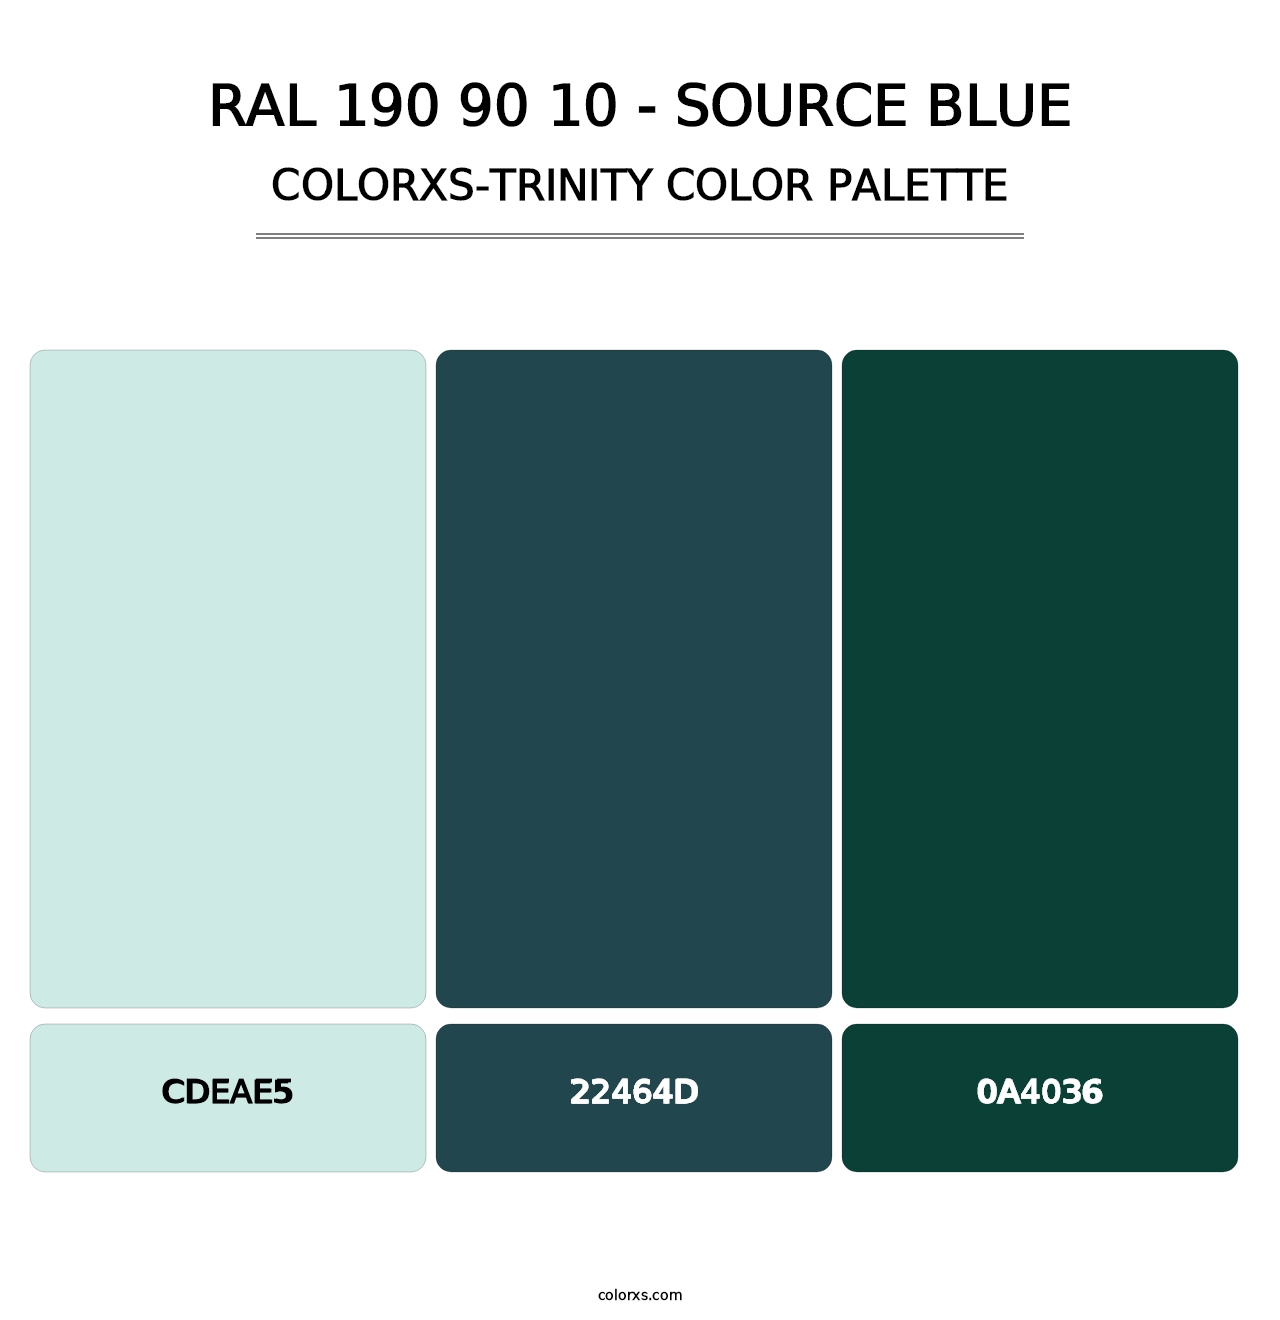 RAL 190 90 10 - Source Blue - Colorxs Trinity Palette